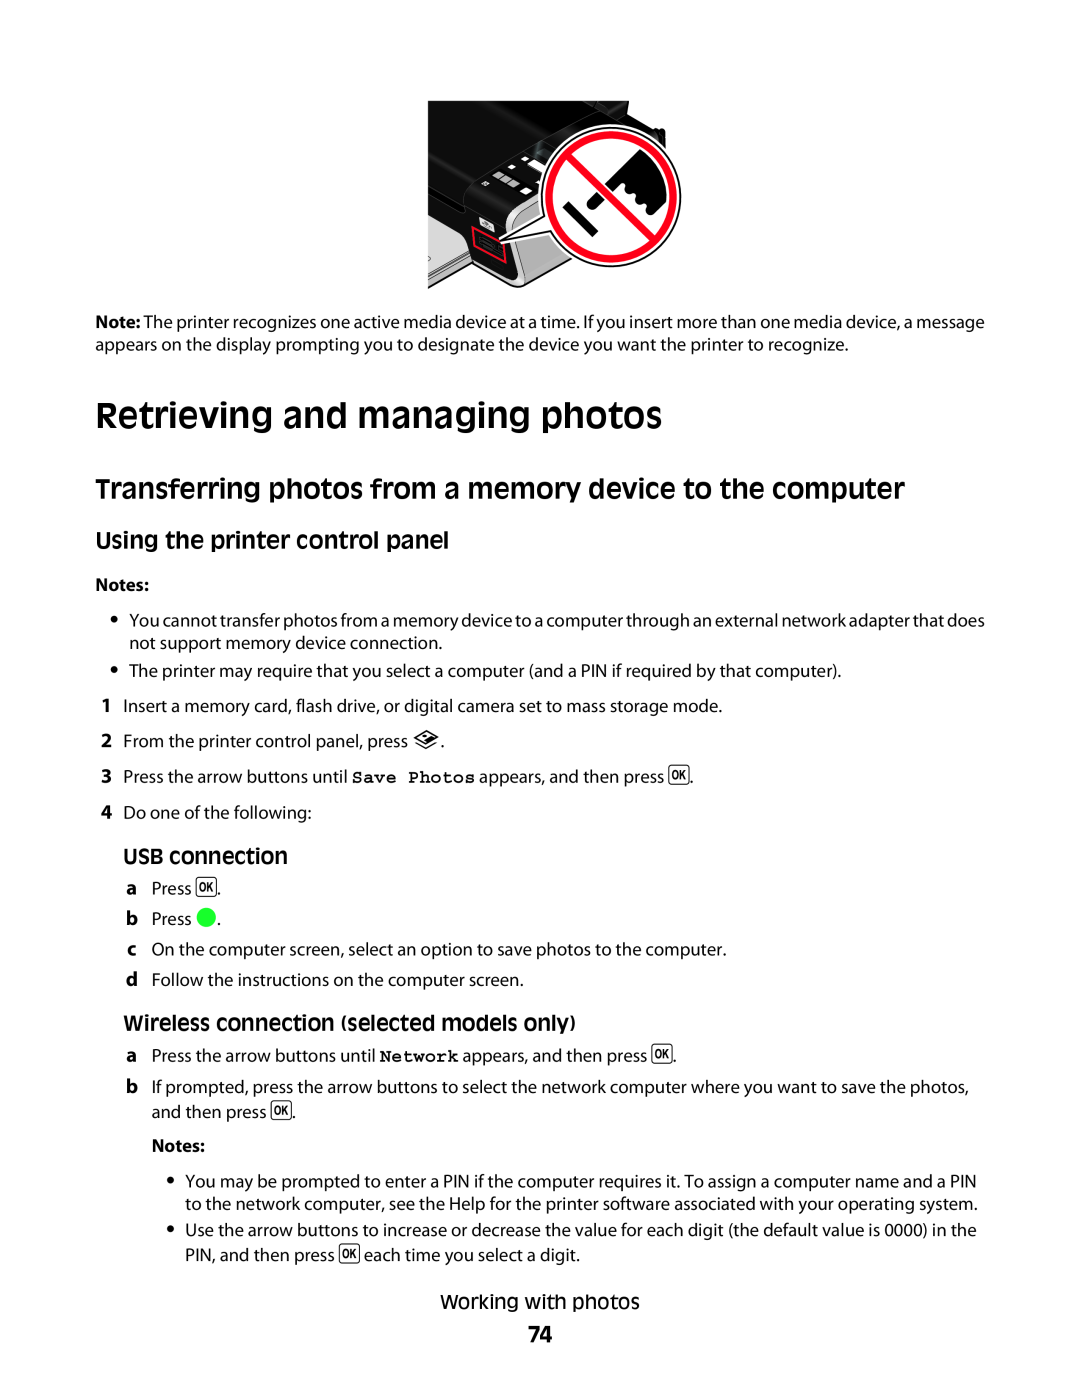 Lexmark 4600, 3600 manual Retrieving and managing photos, Transferring photos from a memory device to the computer 